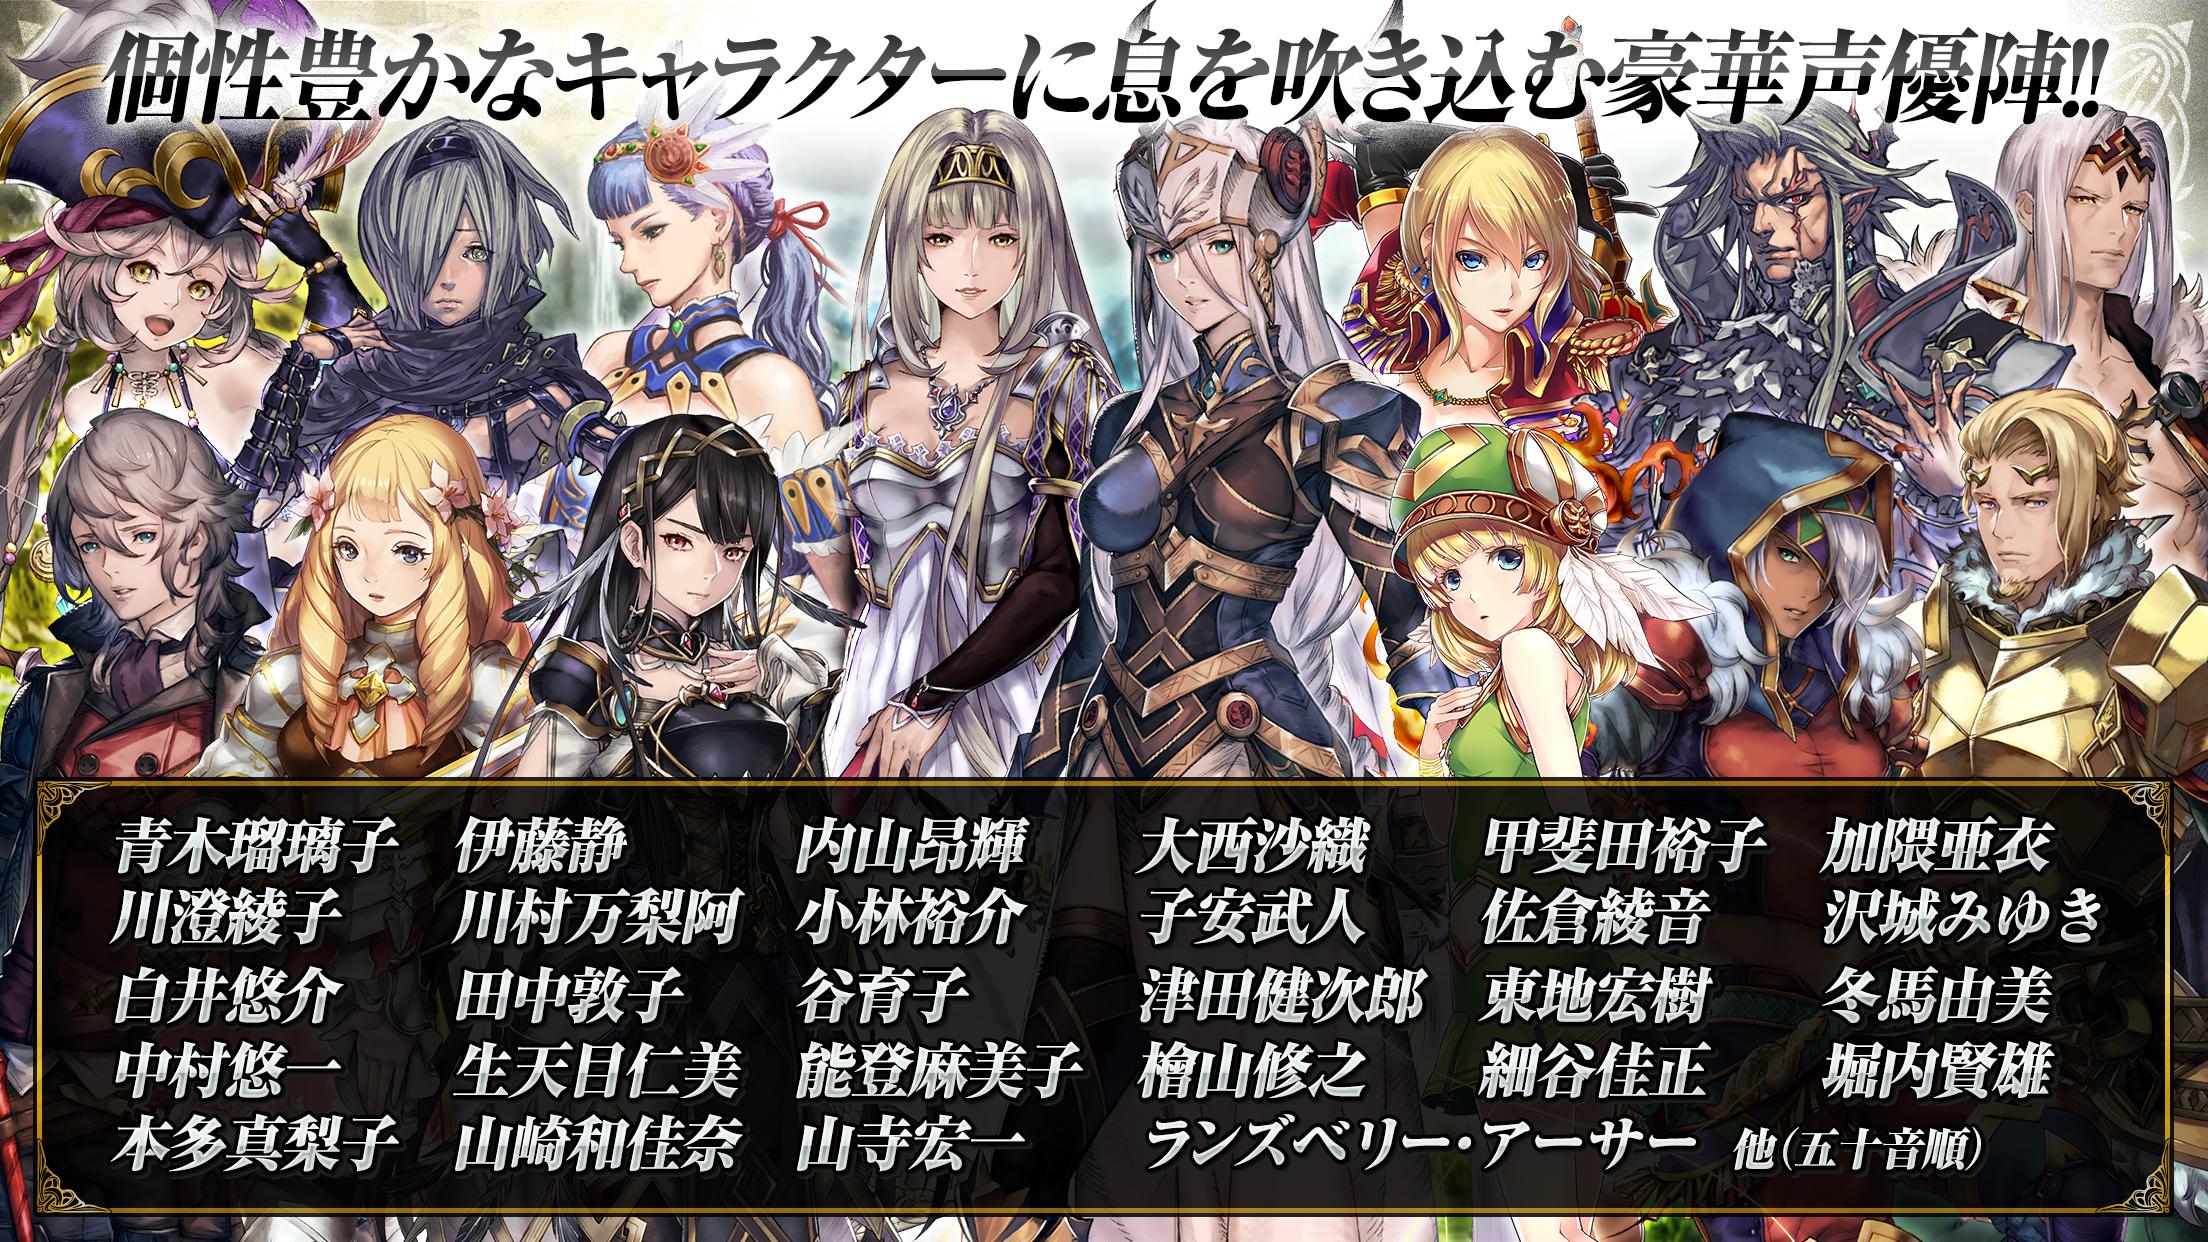 Valkyrie Anatomia ヴァルキリーアナトミア For Android Apk Download